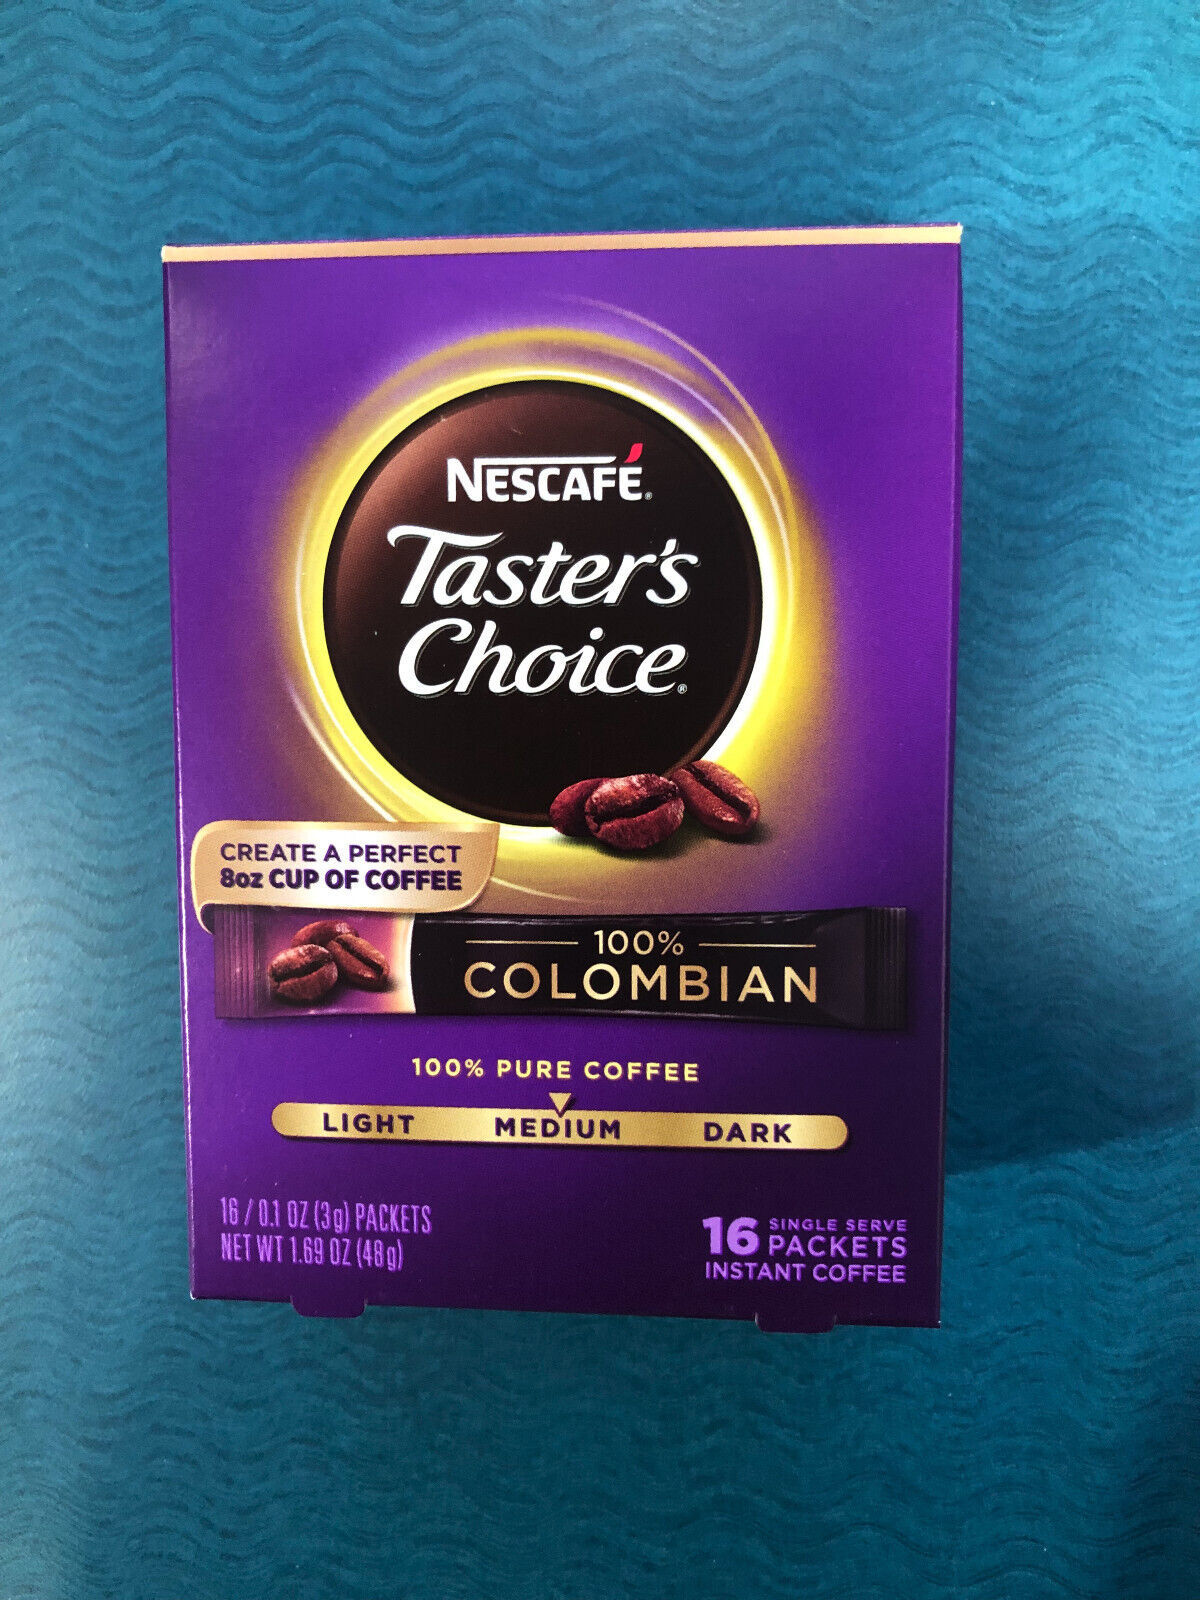 Primary image for NESCAFE TASTER'S CHOICE 100% COLOMBIAN INSTANT COFFEE SINGLE PACKS 16 COUNT